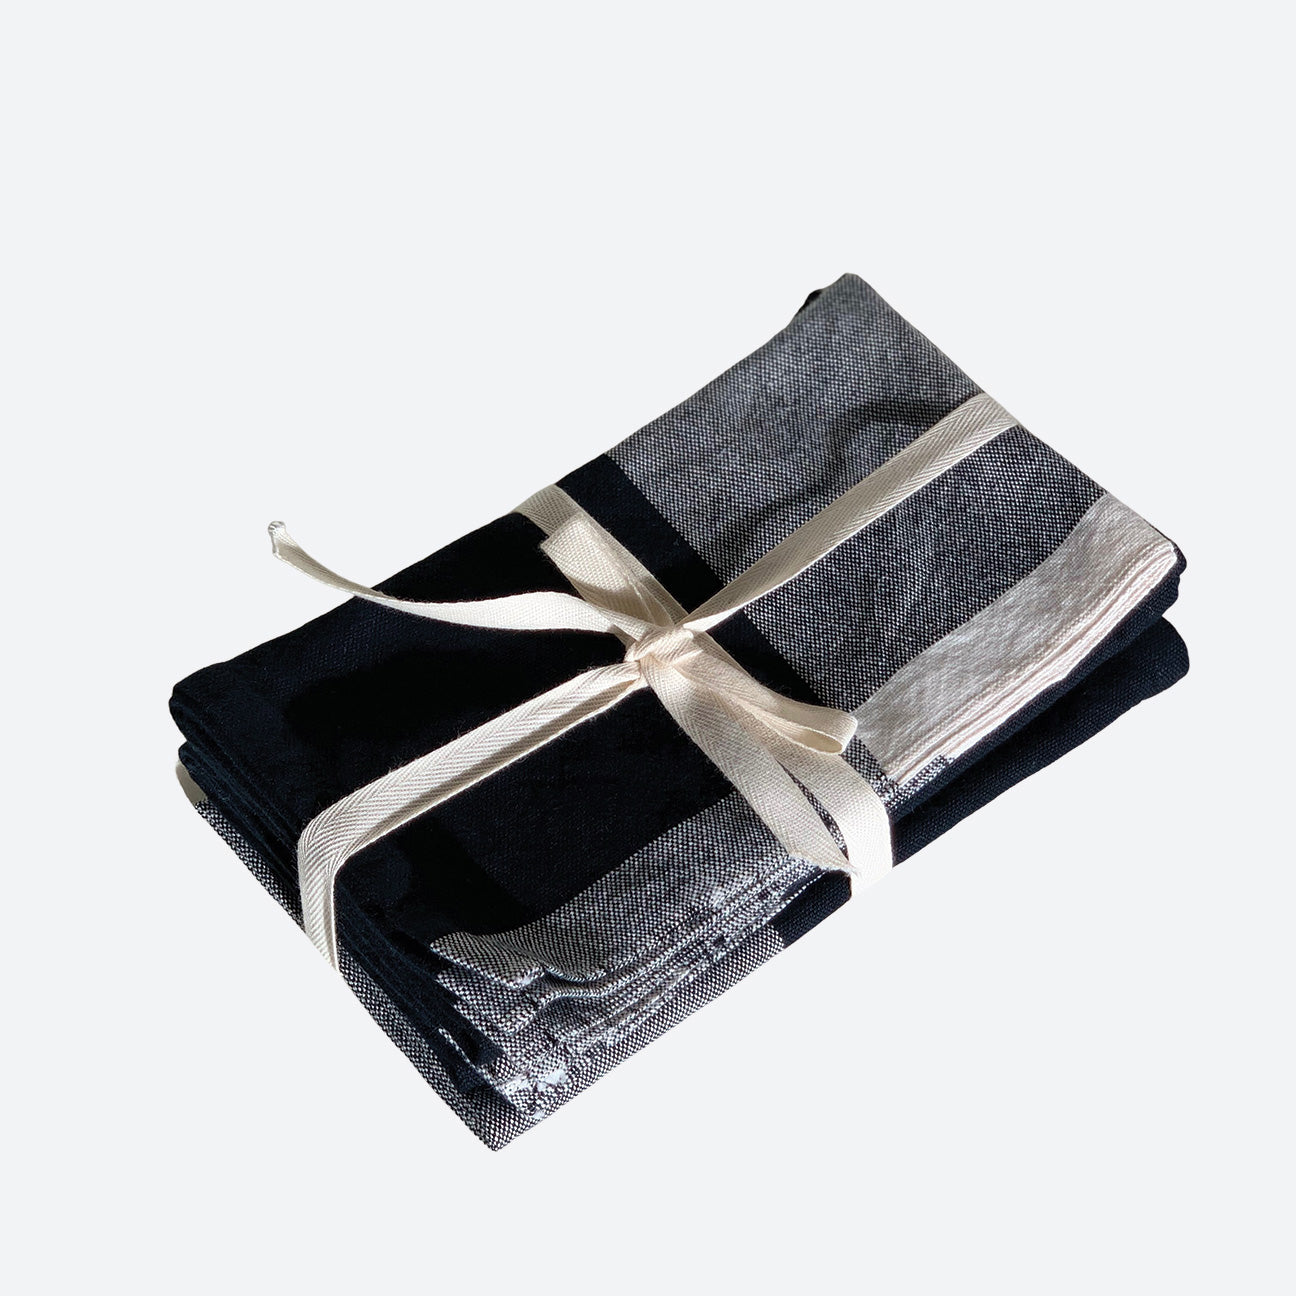 M+A NYC Colorblock Napkins shown as a set of 4 in black/kora